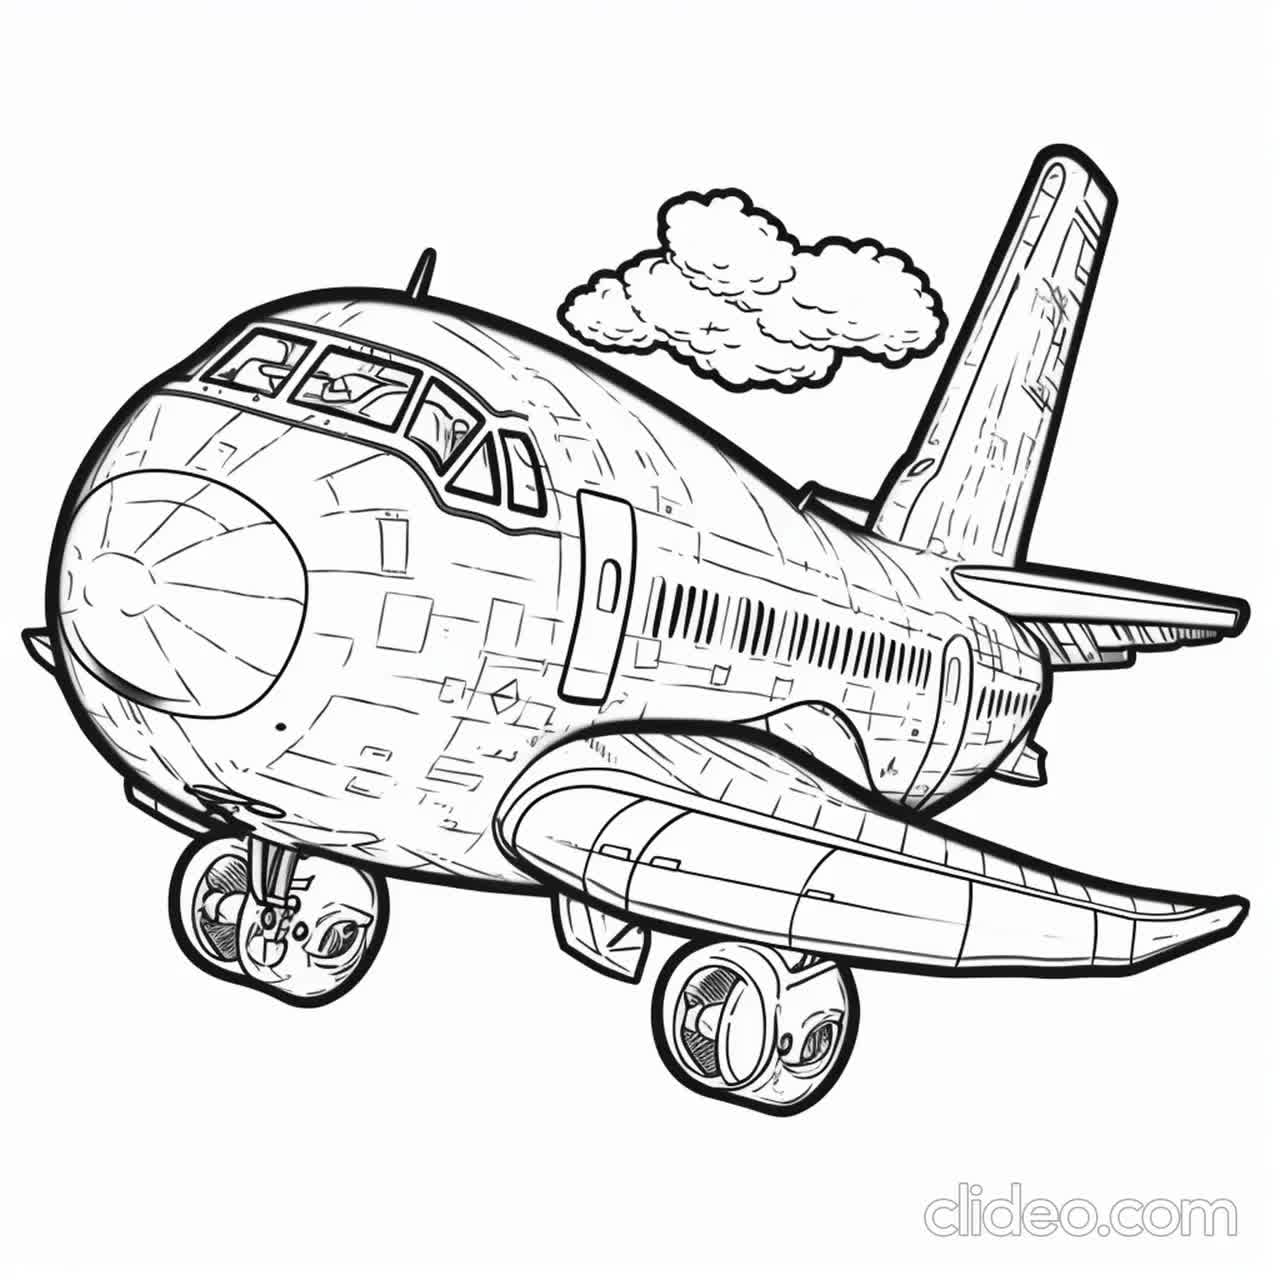 My Airplane Coloring Book: Airplanes Coloring Book for kids, toddlers 2-5, 4-6,6-8, for all ages, +40 beautiful plane;(Kidd's Coloring Books)  (Paperback)